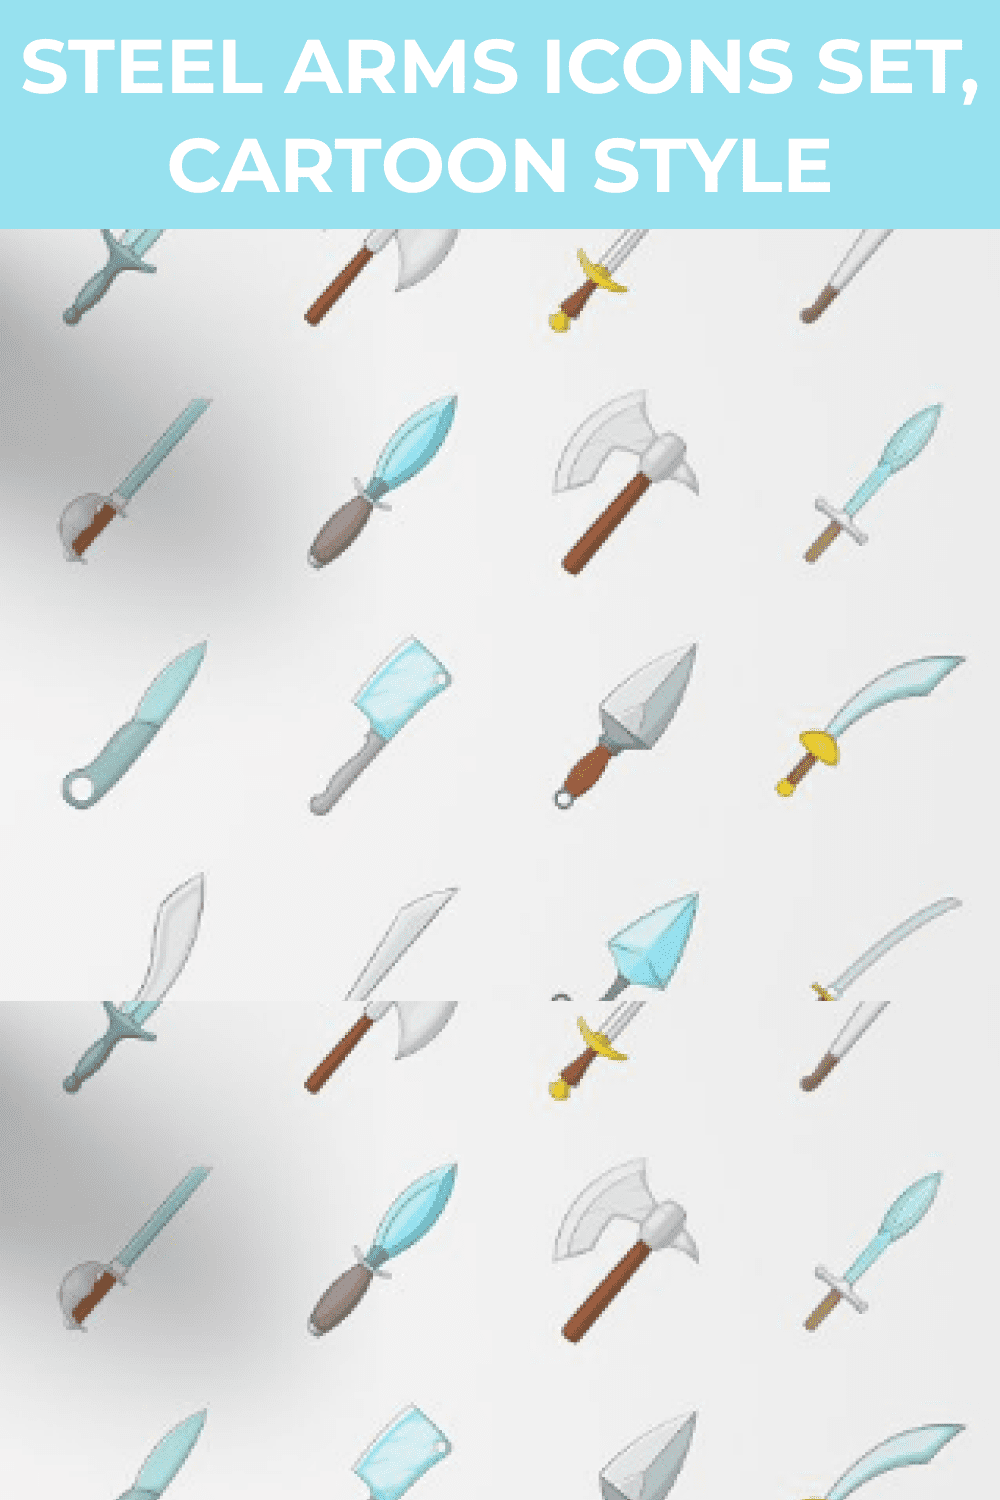 Steel Arms Icons Set and Cartoon Style.